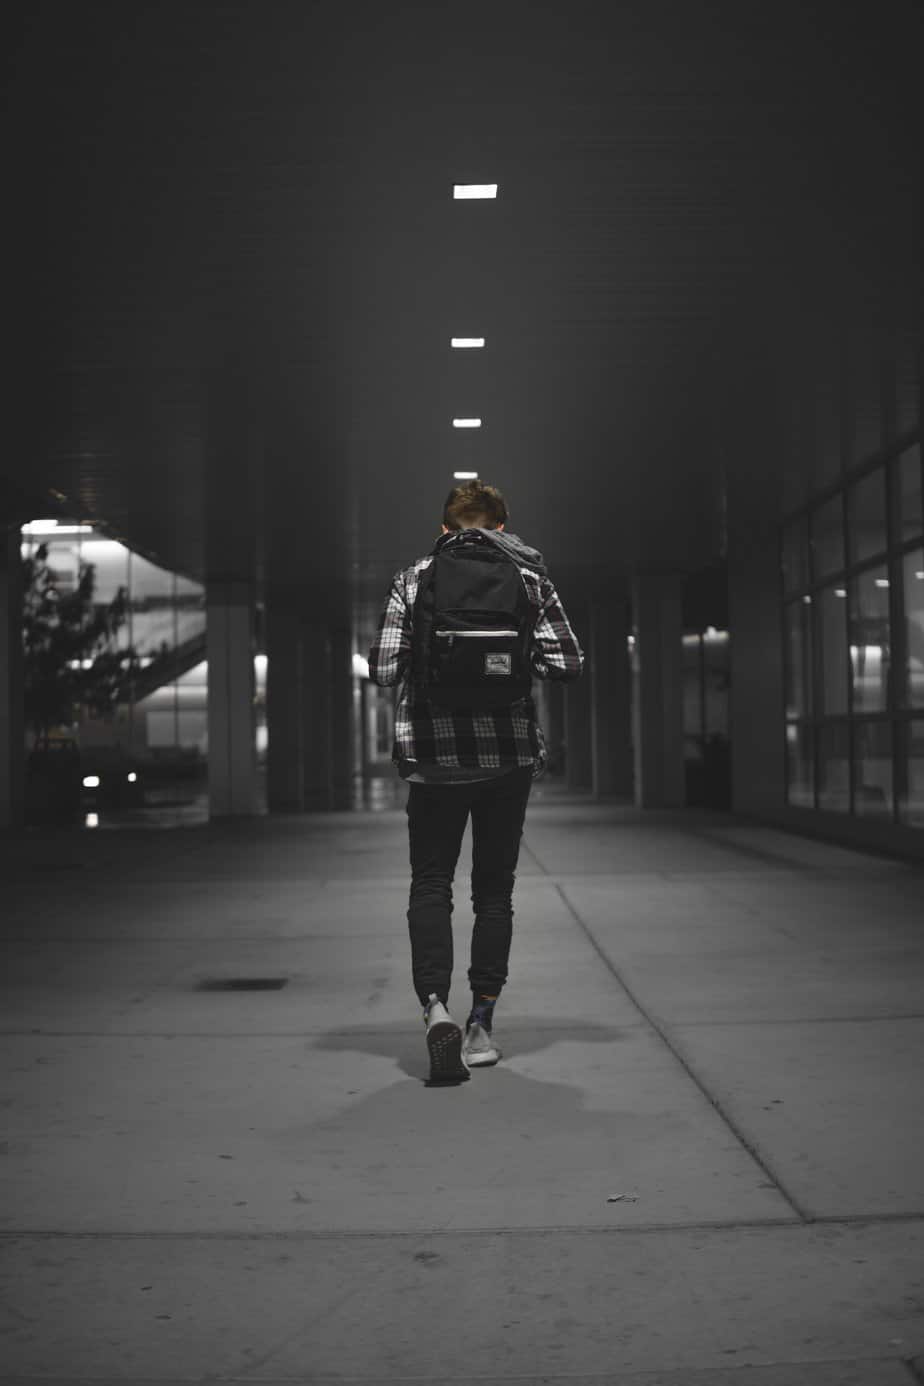 A man walks alone in a dark outdoor walkway from behind, a black backpack on.